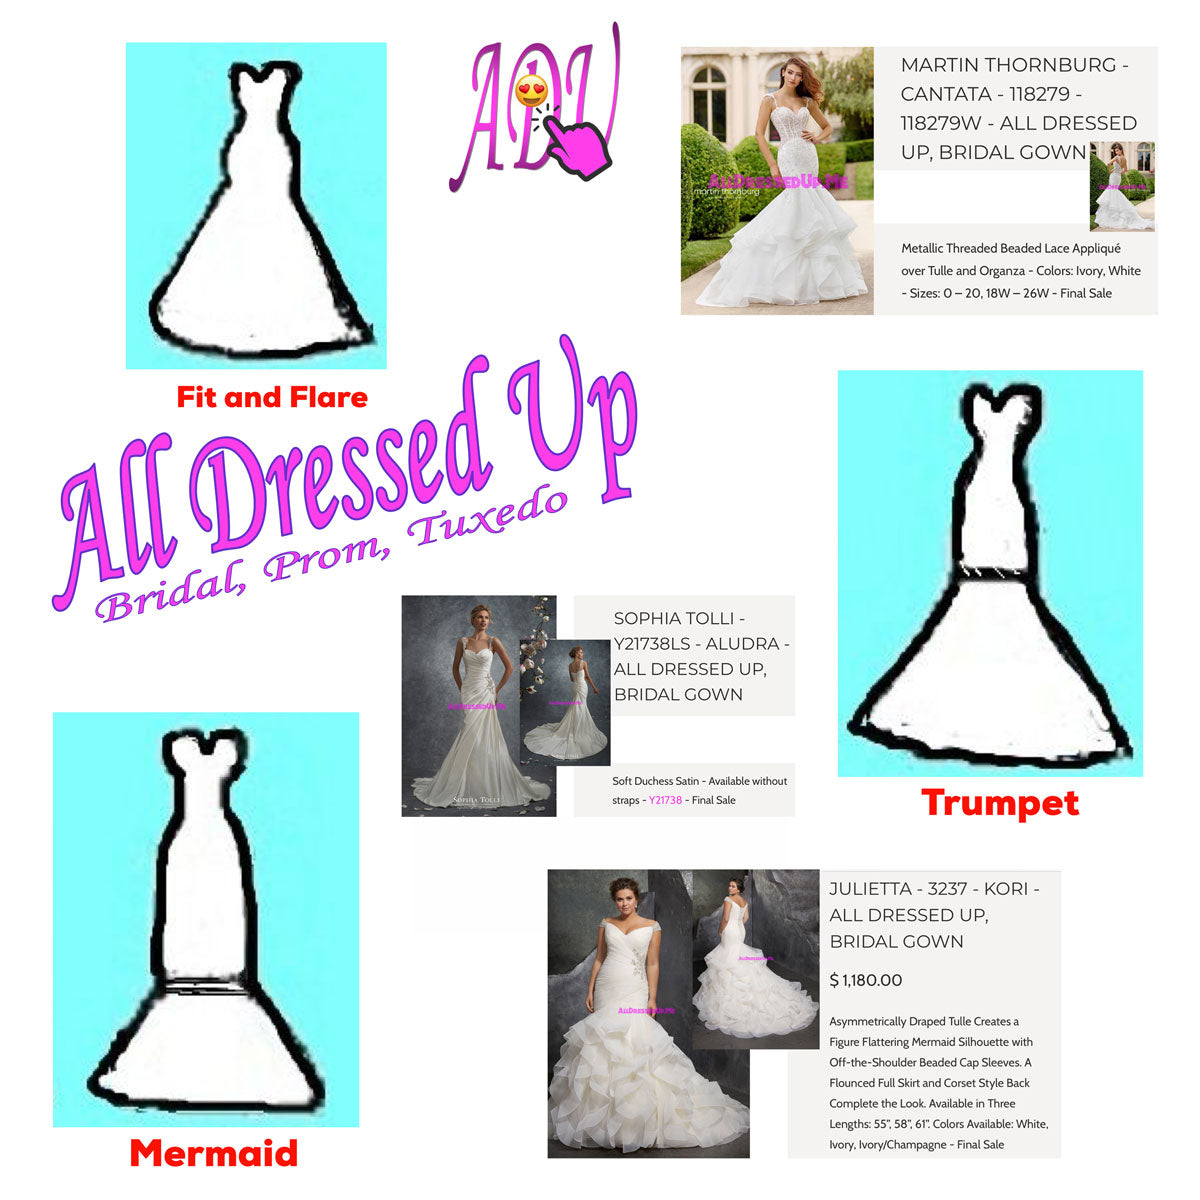 A Guide to Popular Wedding Gown Silhouettes | Part 2 of 2 | All Dressed Up Bridal Prom Tuxedo | Chattanooga, TN